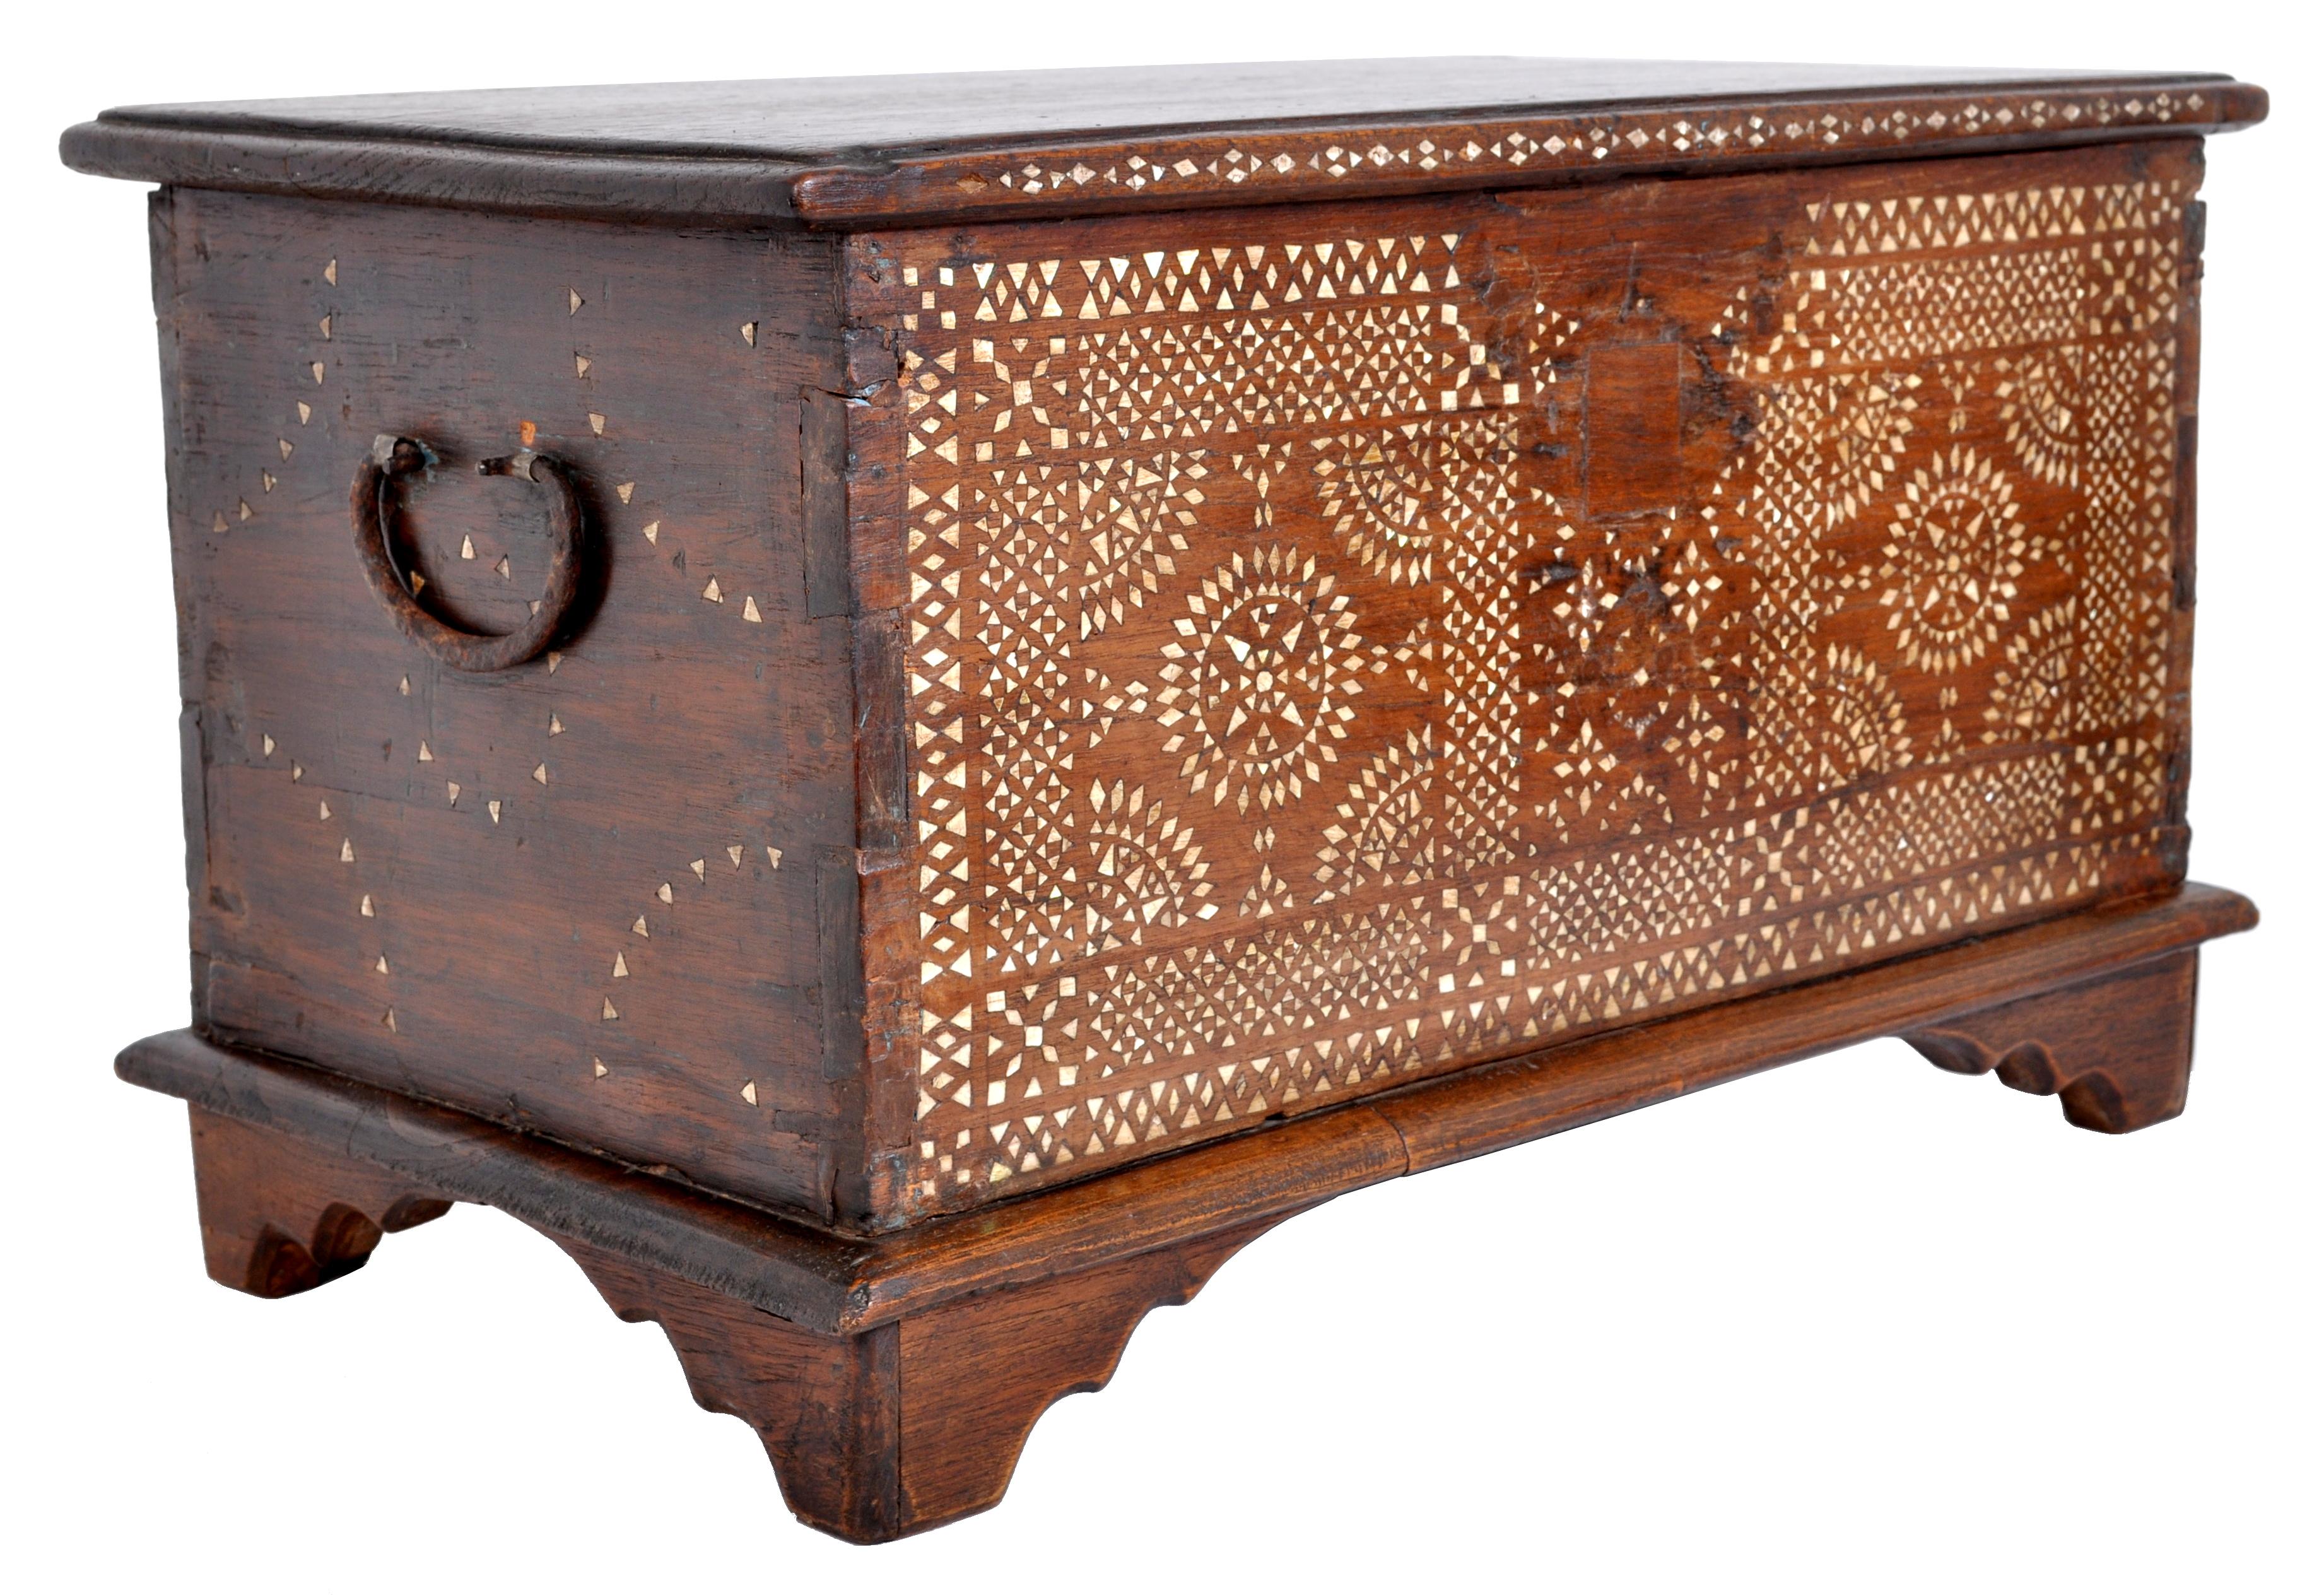 A good antique Moroccan Islamic box inlaid with mother of pearl, circa 1900. The casket having a hinged lid enclosing a storage area wth a single lidded till. The trunk is profusely inlaid with mother of pearl in a geometric design and has iron